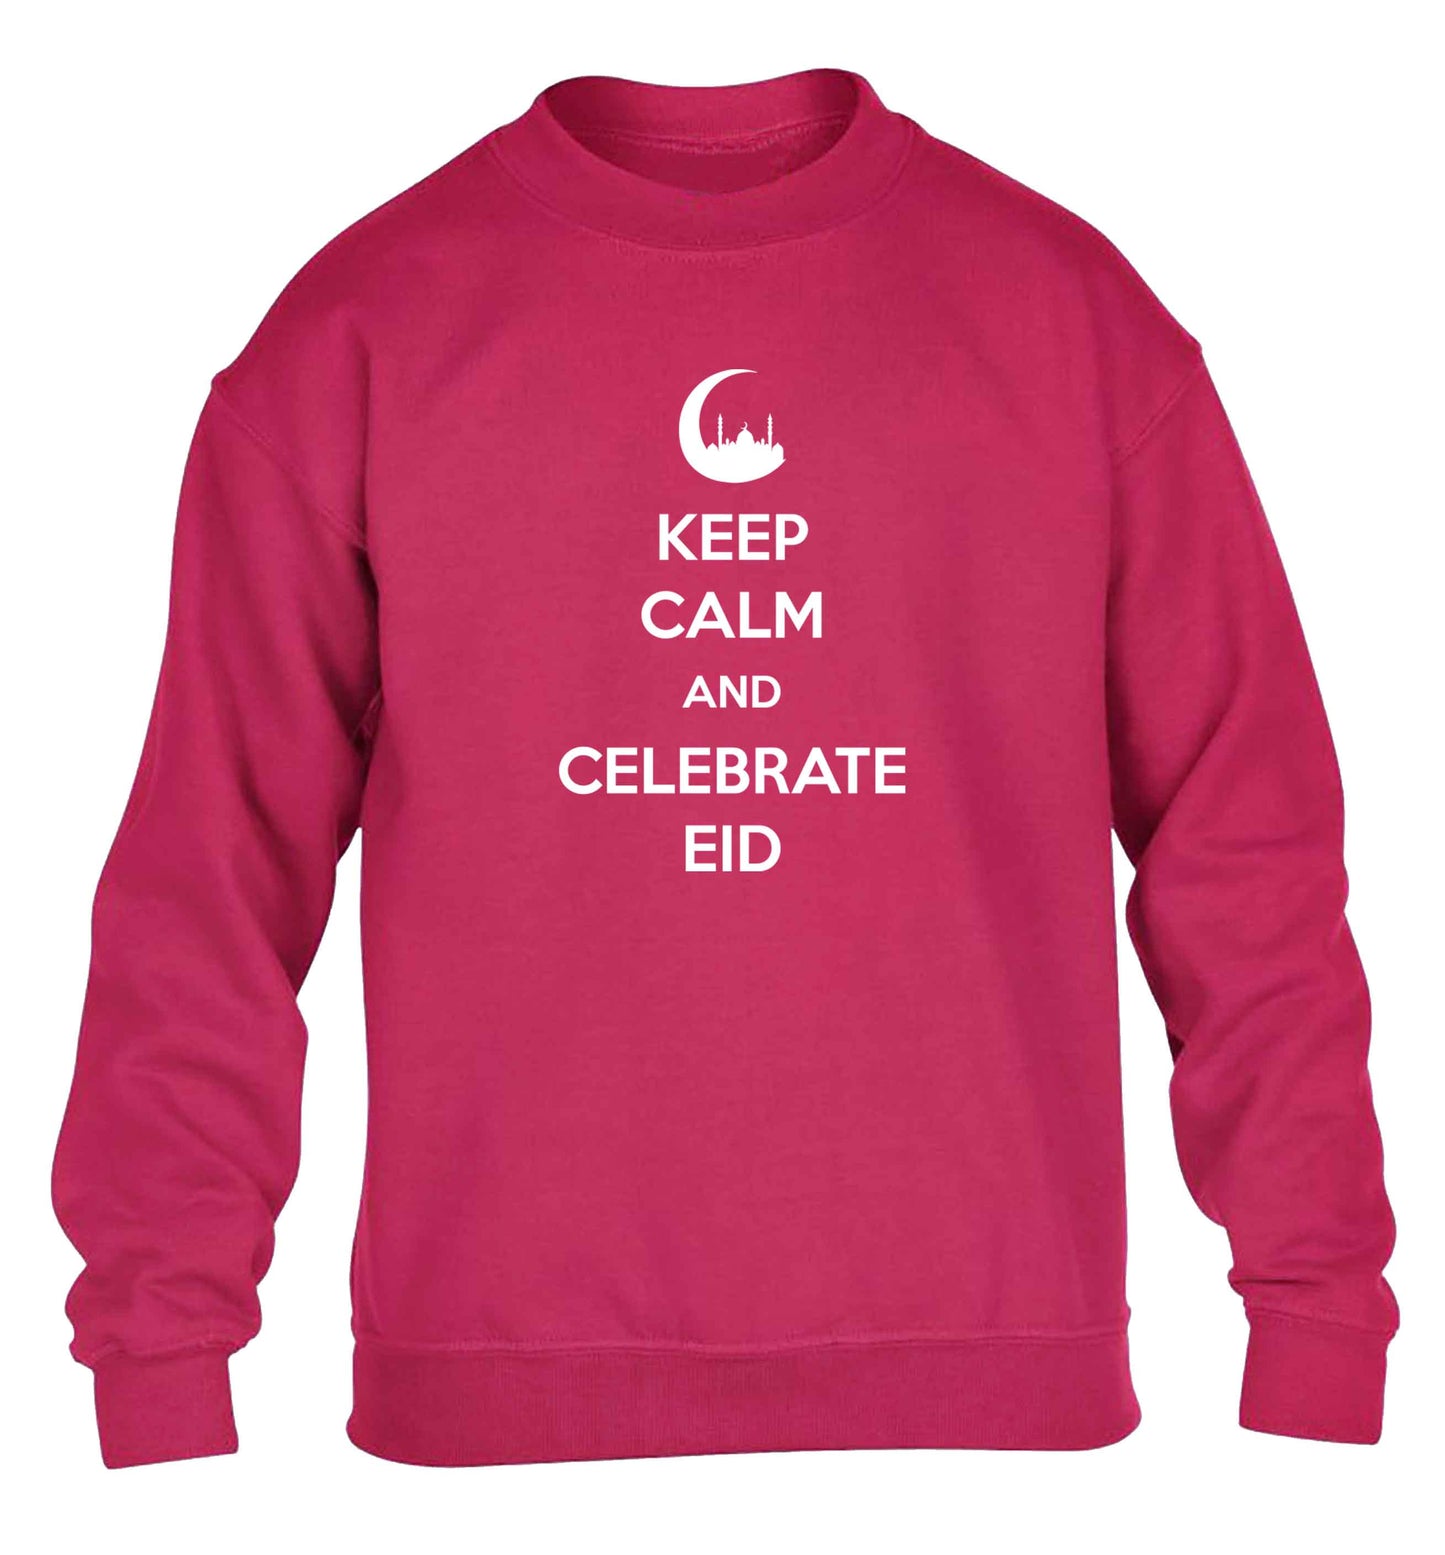 Keep calm and celebrate Eid children's pink sweater 12-13 Years